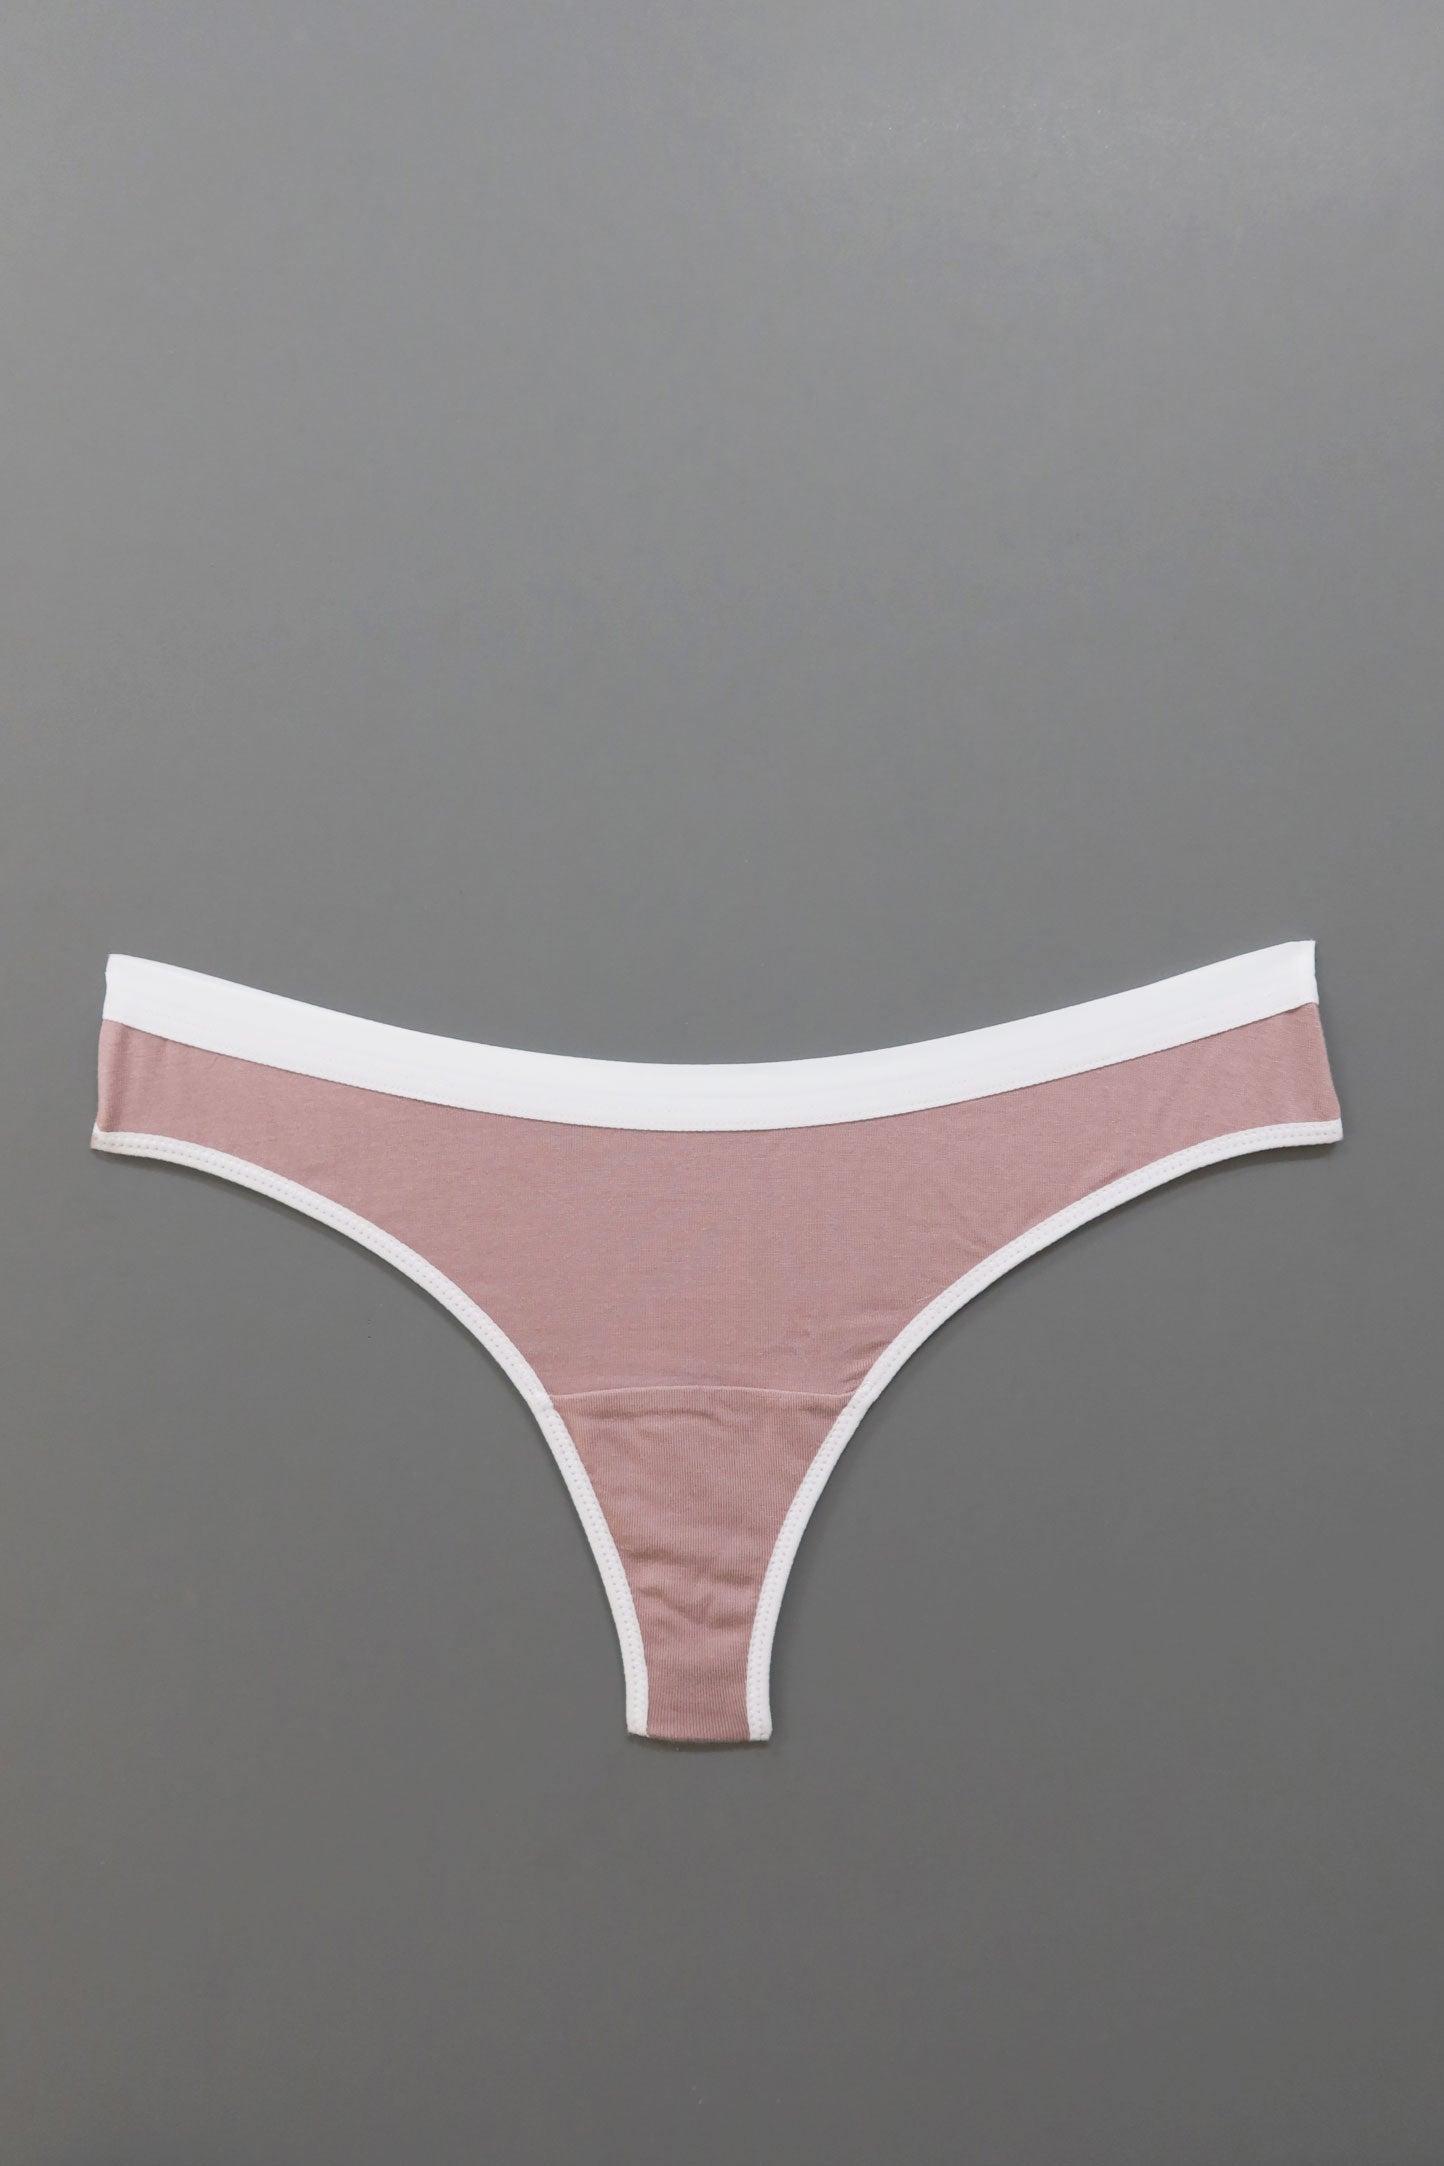 MARY YOUNG Emery Thong in Dusty Rose